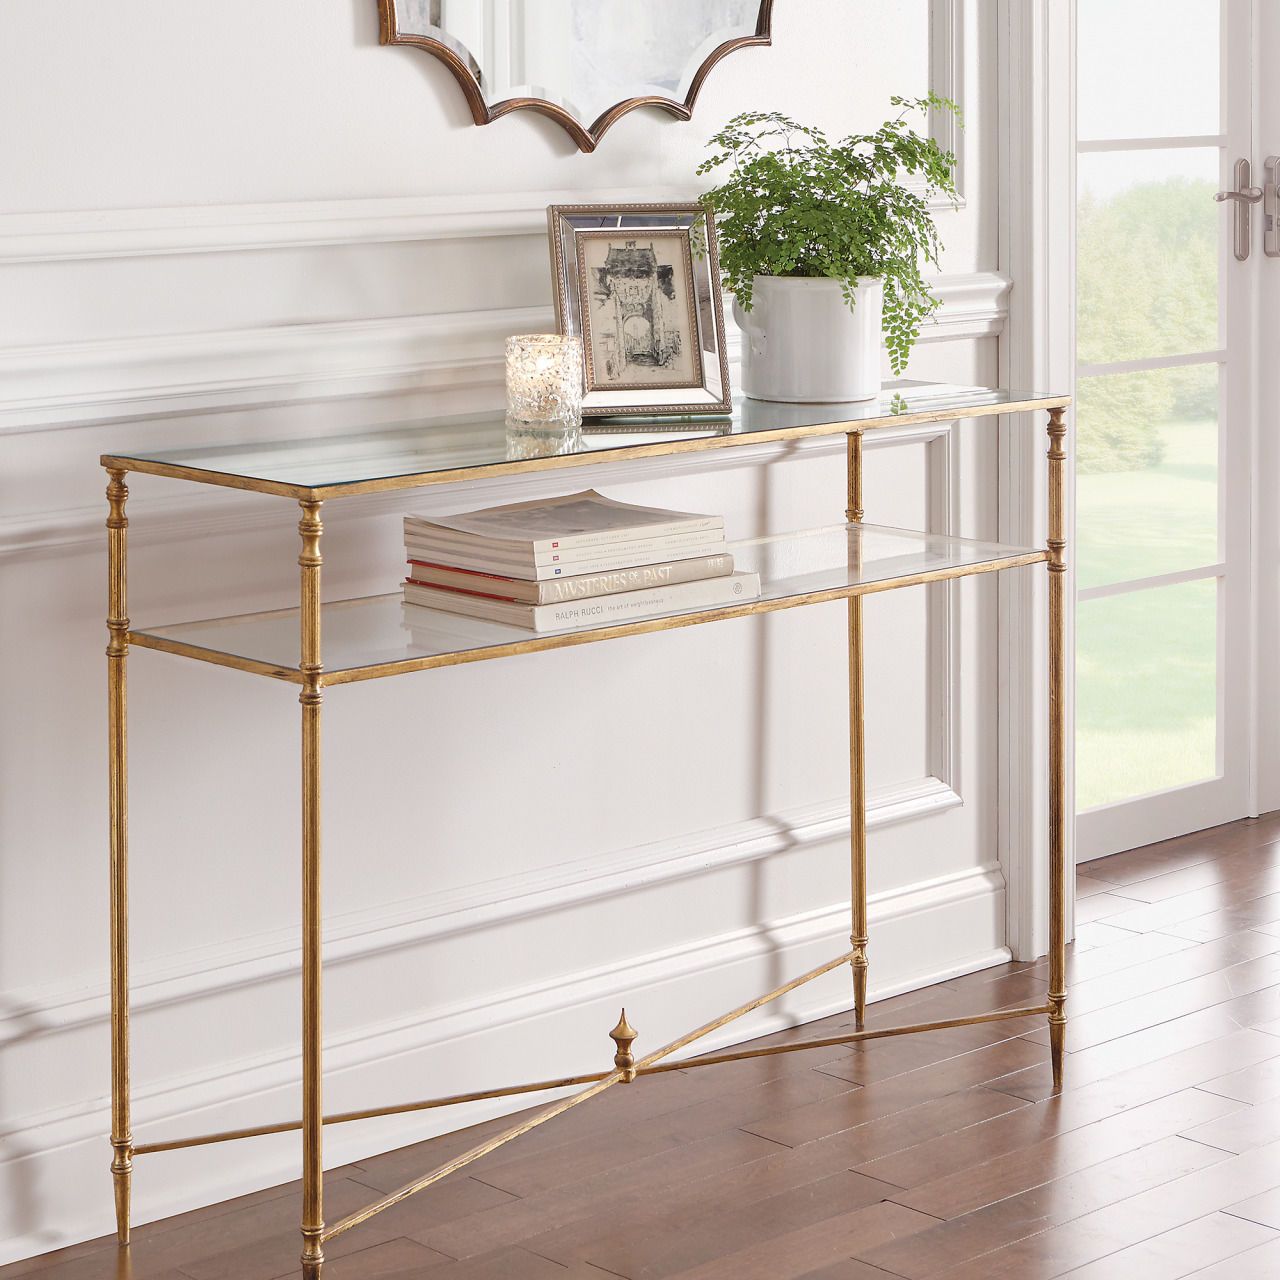 Horchow Sofa Console Table Hollywood Regency Antique Gold Regarding Glass And Pewter Console Tables (View 9 of 20)